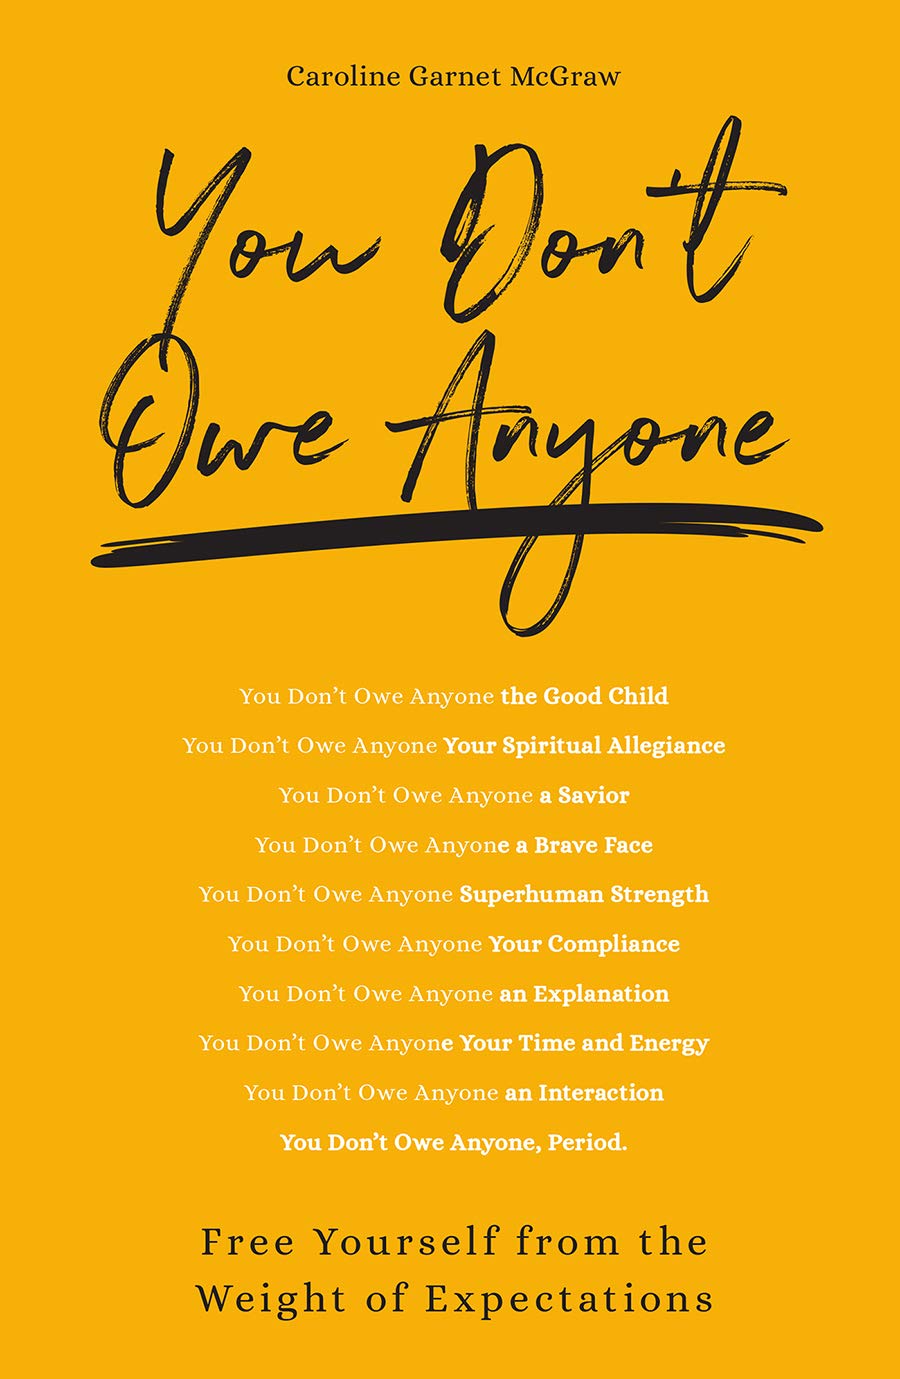 Book cover of You don't owe anyone by Caroline Garnet McGraw